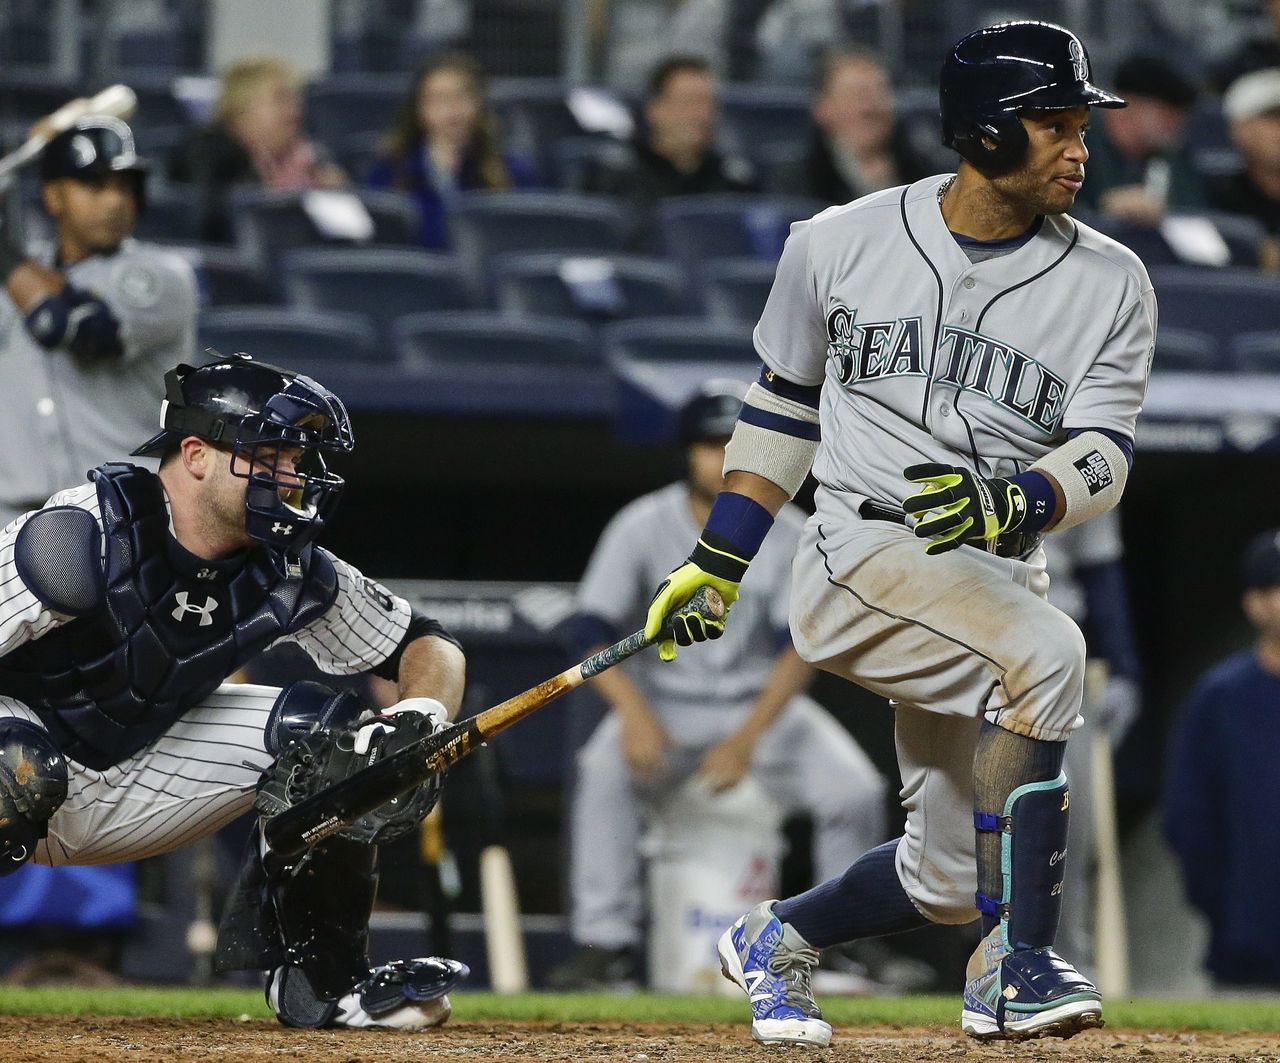 The Mariners Robinson Cano follows through on an RBI single as Yankees catcher Brian McCann watches during a game Friday in New York.